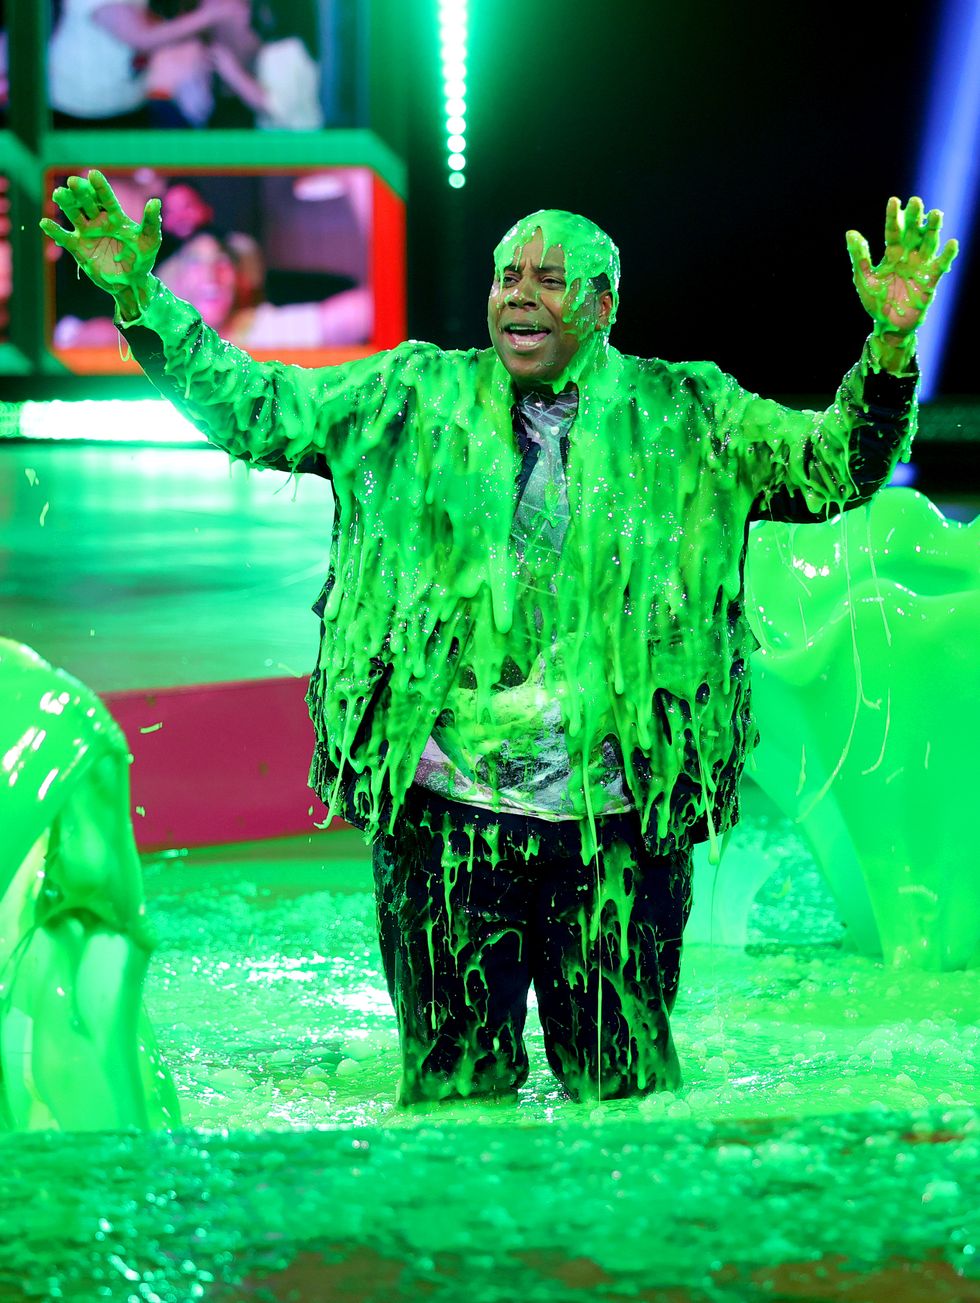 14 Outrageous Facts About Nickelodeon Slime